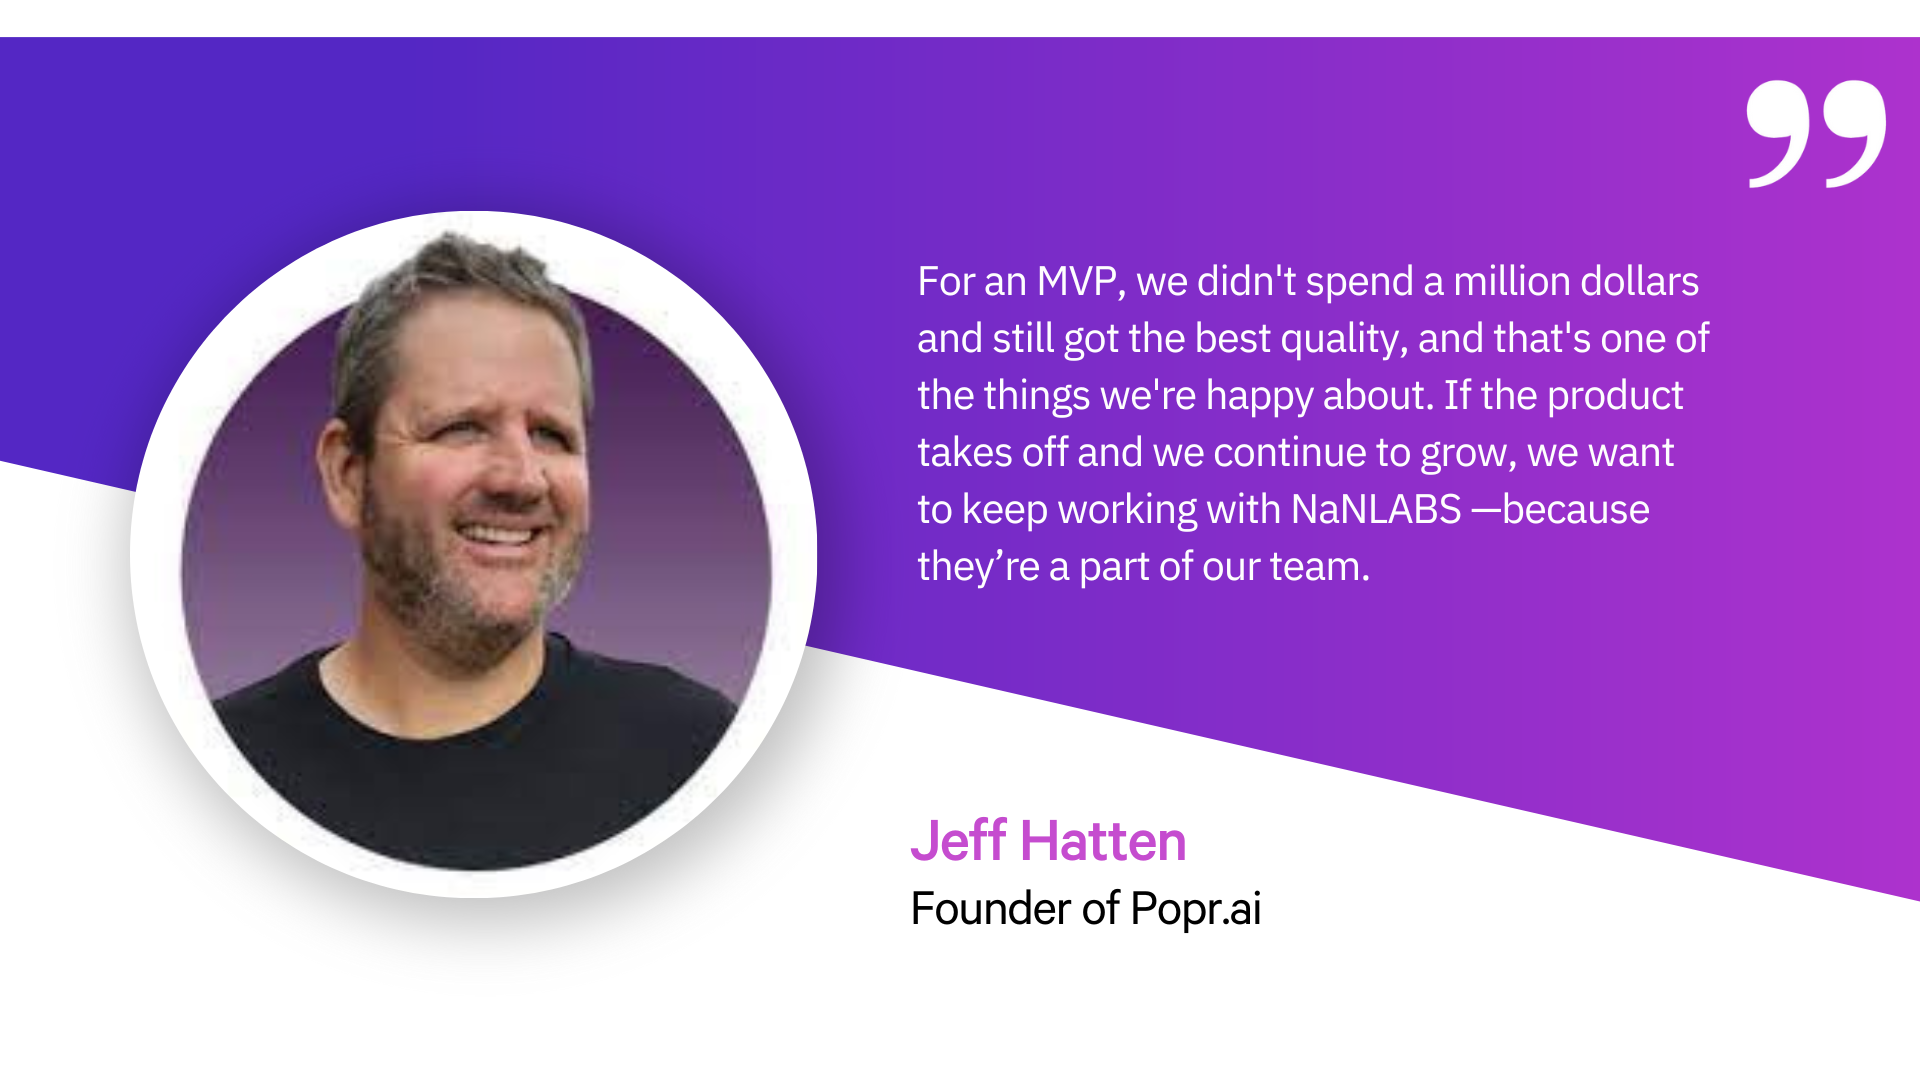 Quote by Popr.ai founder on partnering with NaNLABS to build MVPs